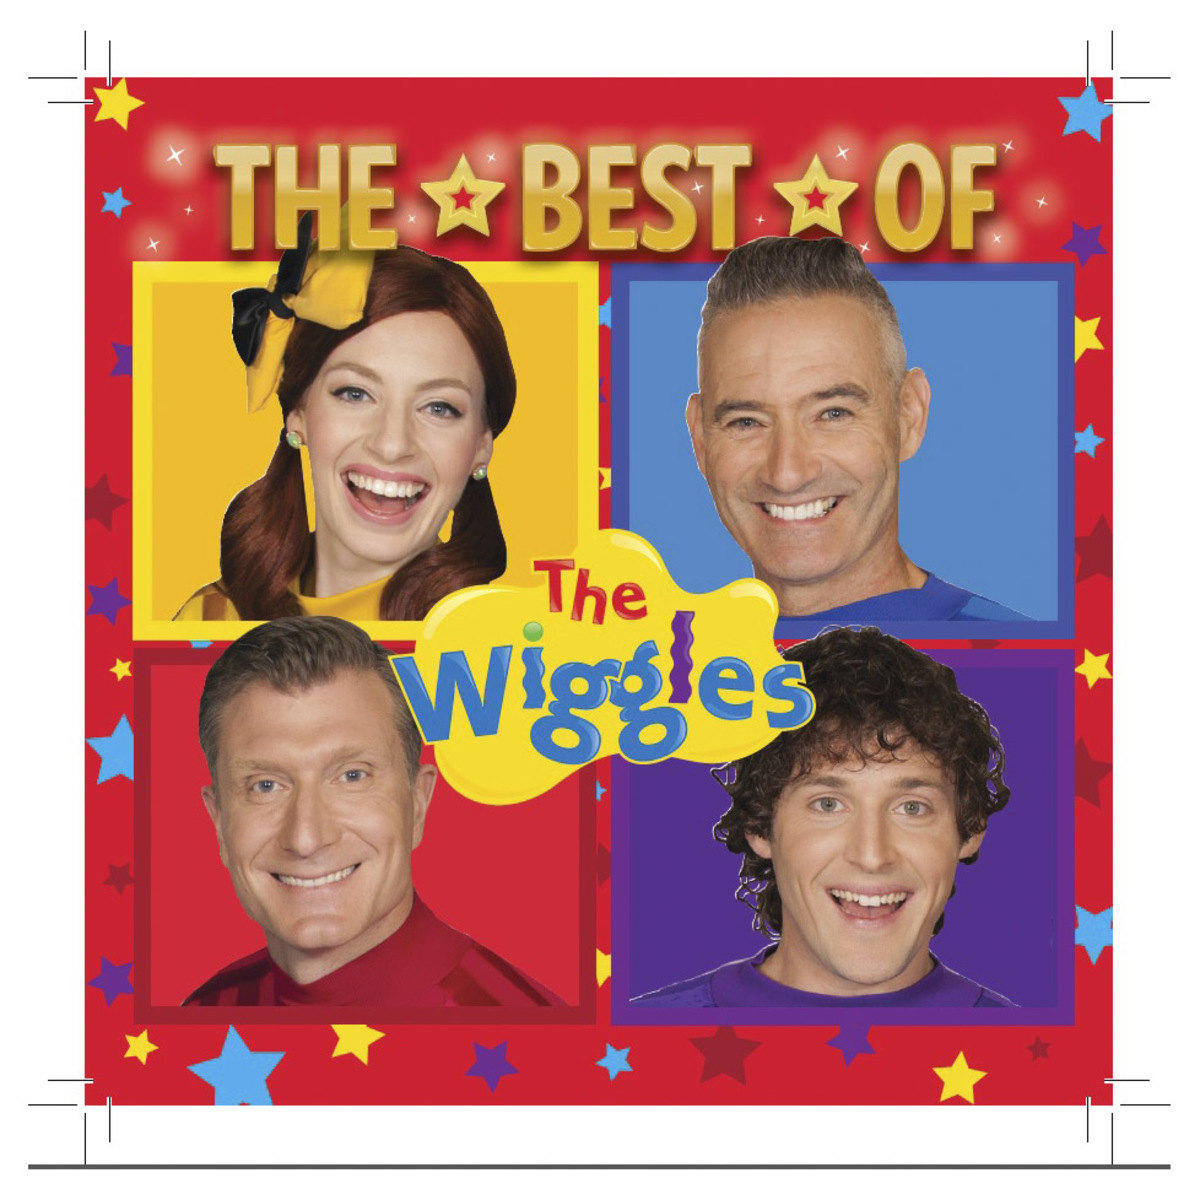 The Best of the Wiggles - CD